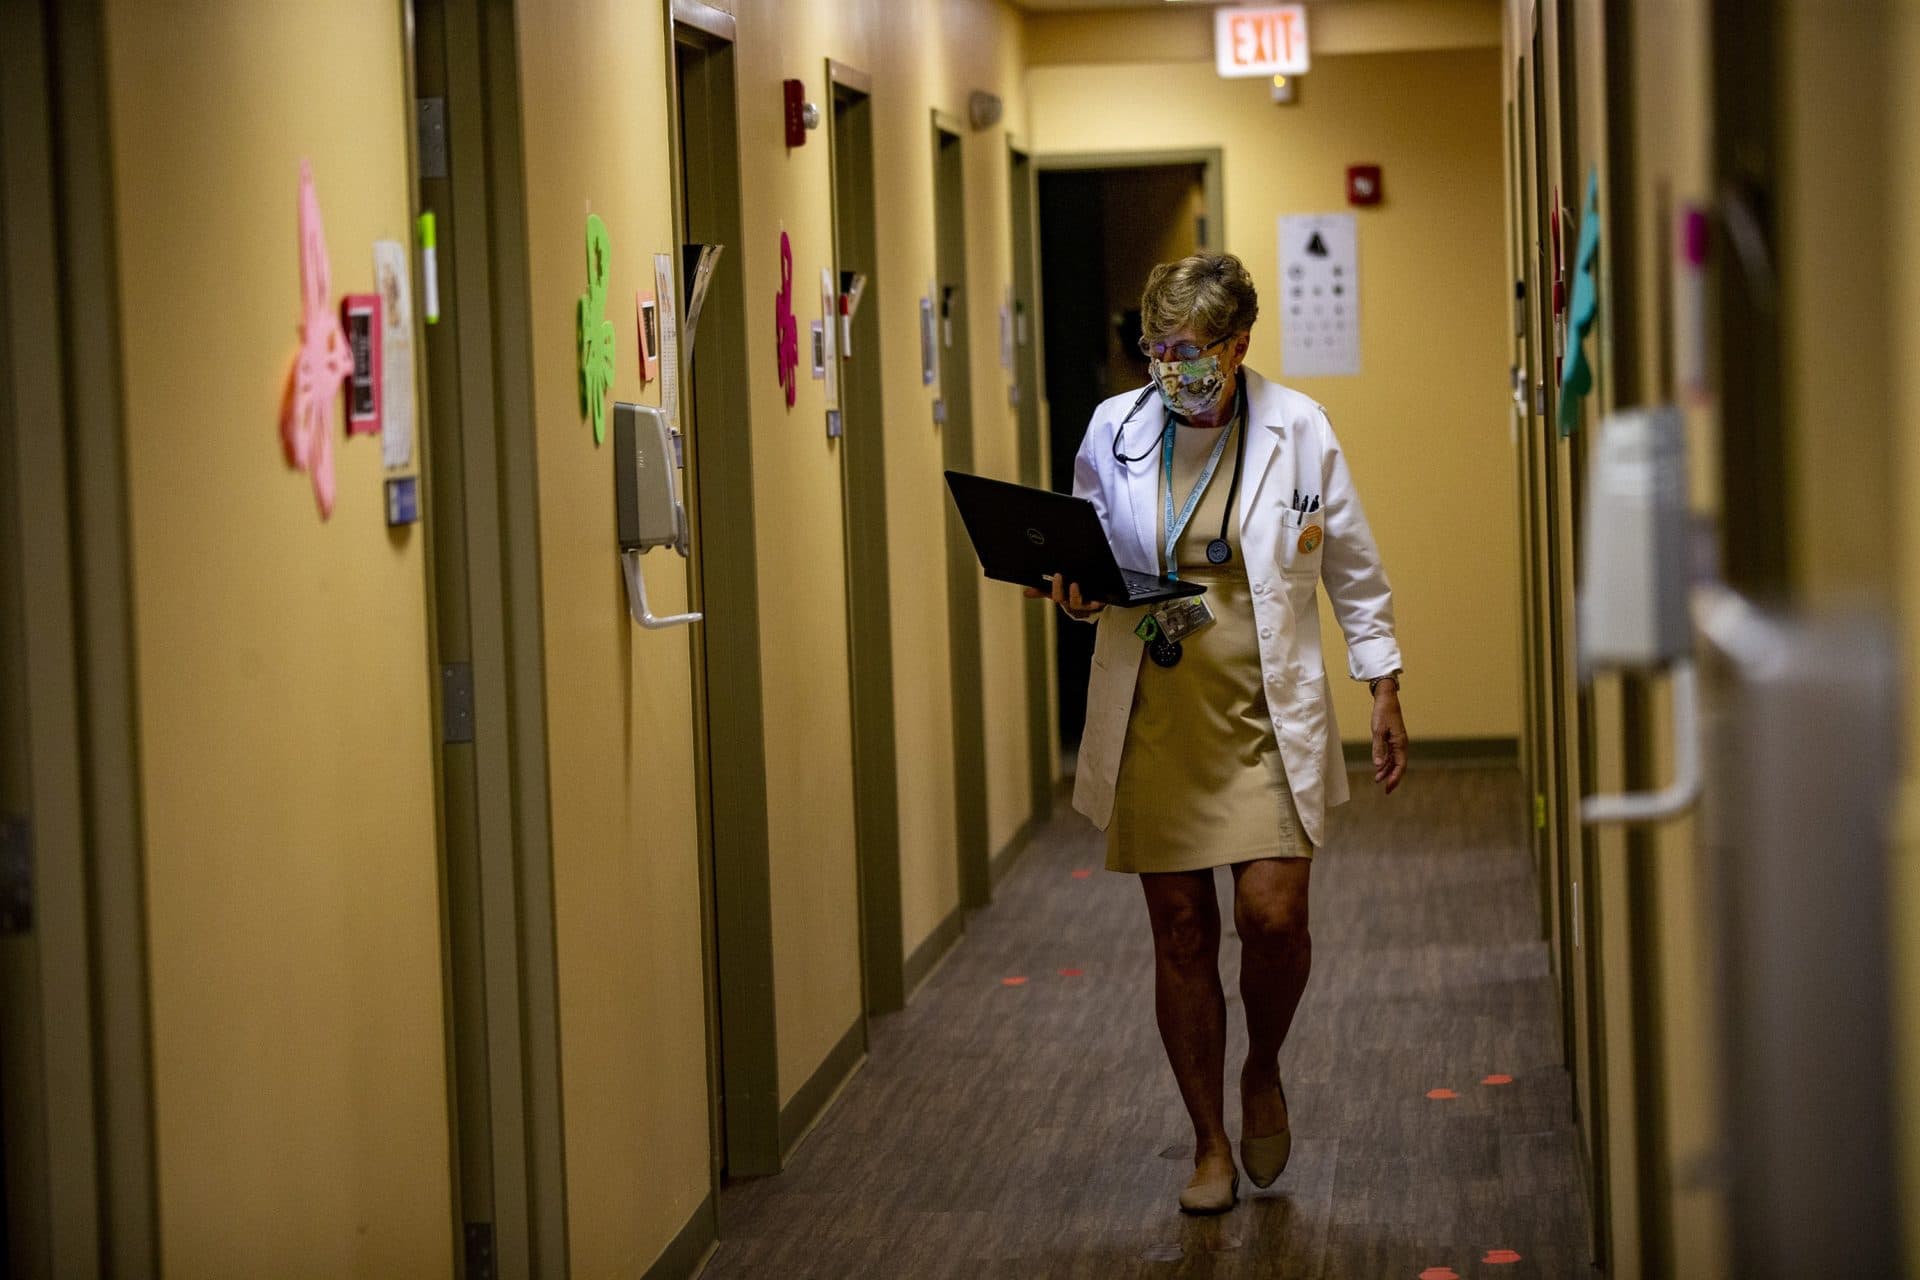 After finishing up an exam with a patient, pediatrician Dr. Janemarie Dolan walks through the corridor of Brockton Neighborhood Health Center to visit her next patient. (Jesse Costa/WBUR)